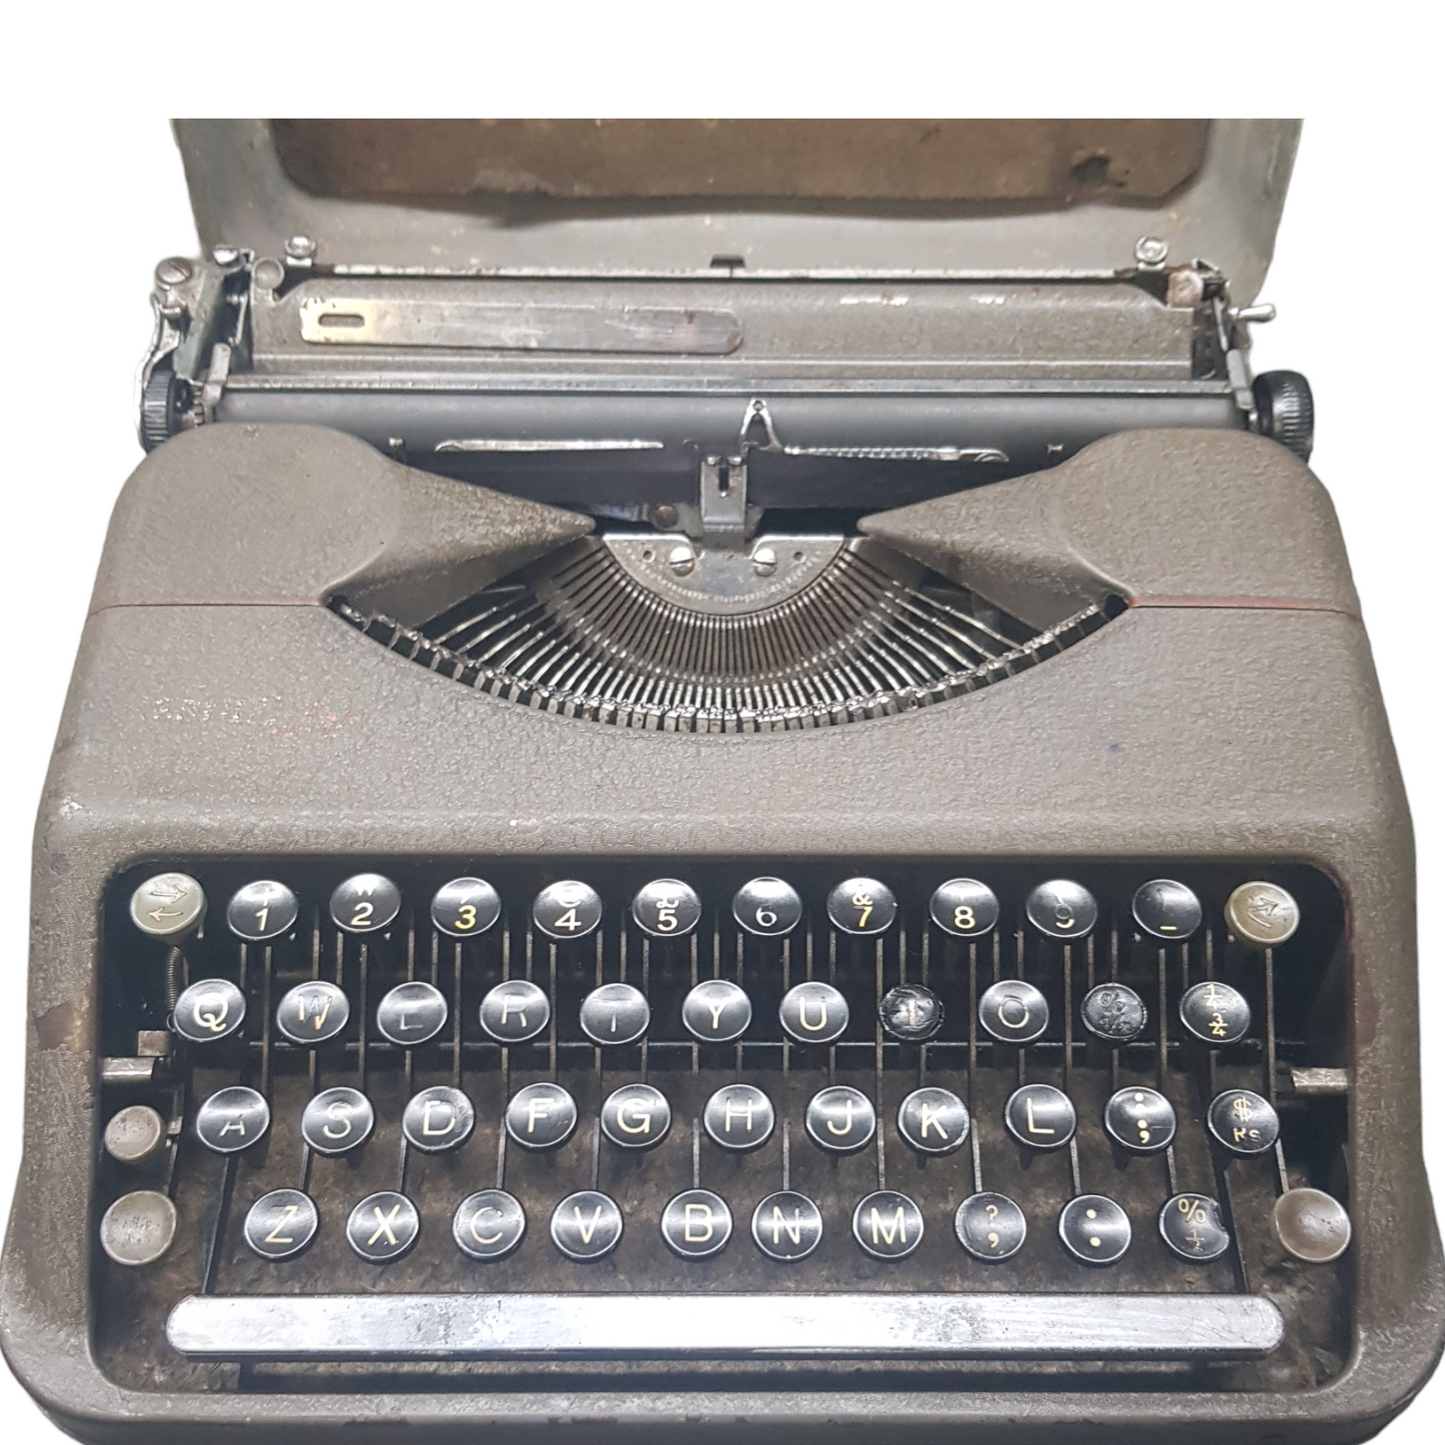 Image of Hermes Baby Old Typewriter. Portable Typewriter. Original Dark Grey. Swiss Made. Available with cover. Available from universaltypewritercompany.in